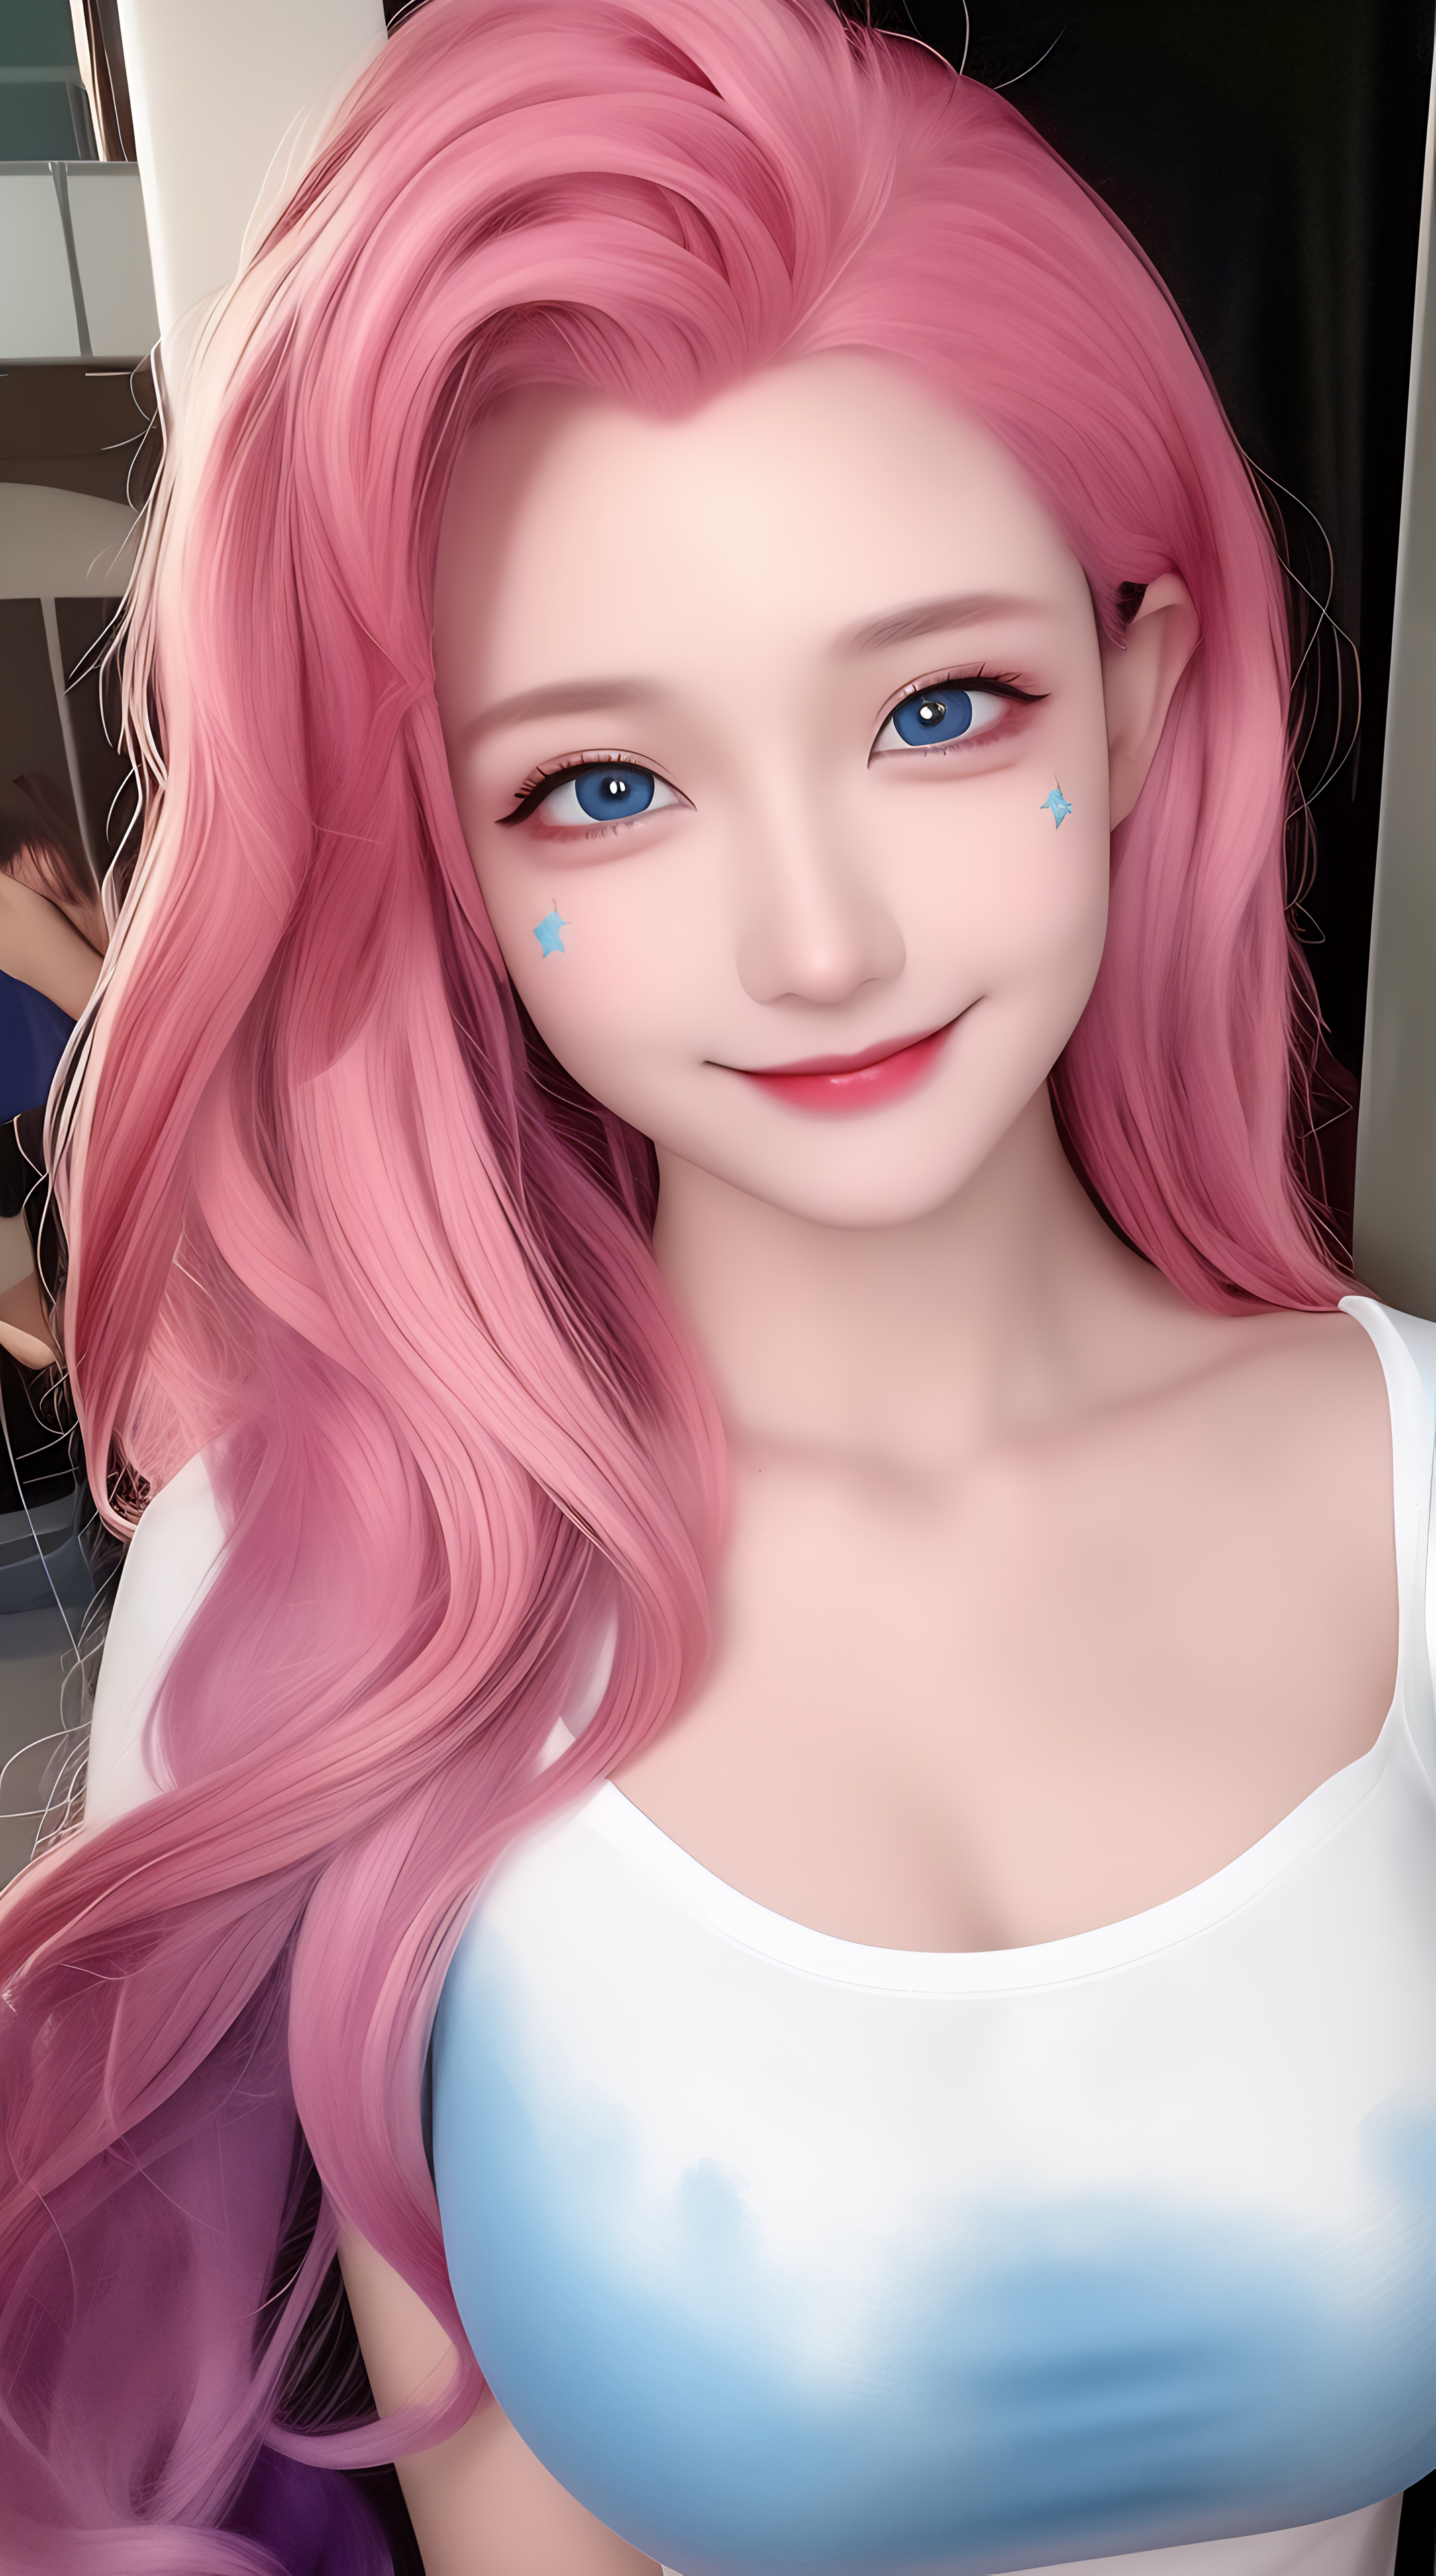 Seraphine League Of Legends League Of Legends Pink Hair Ai Art Vertical Smiling Looking At Viewer 2140x3840